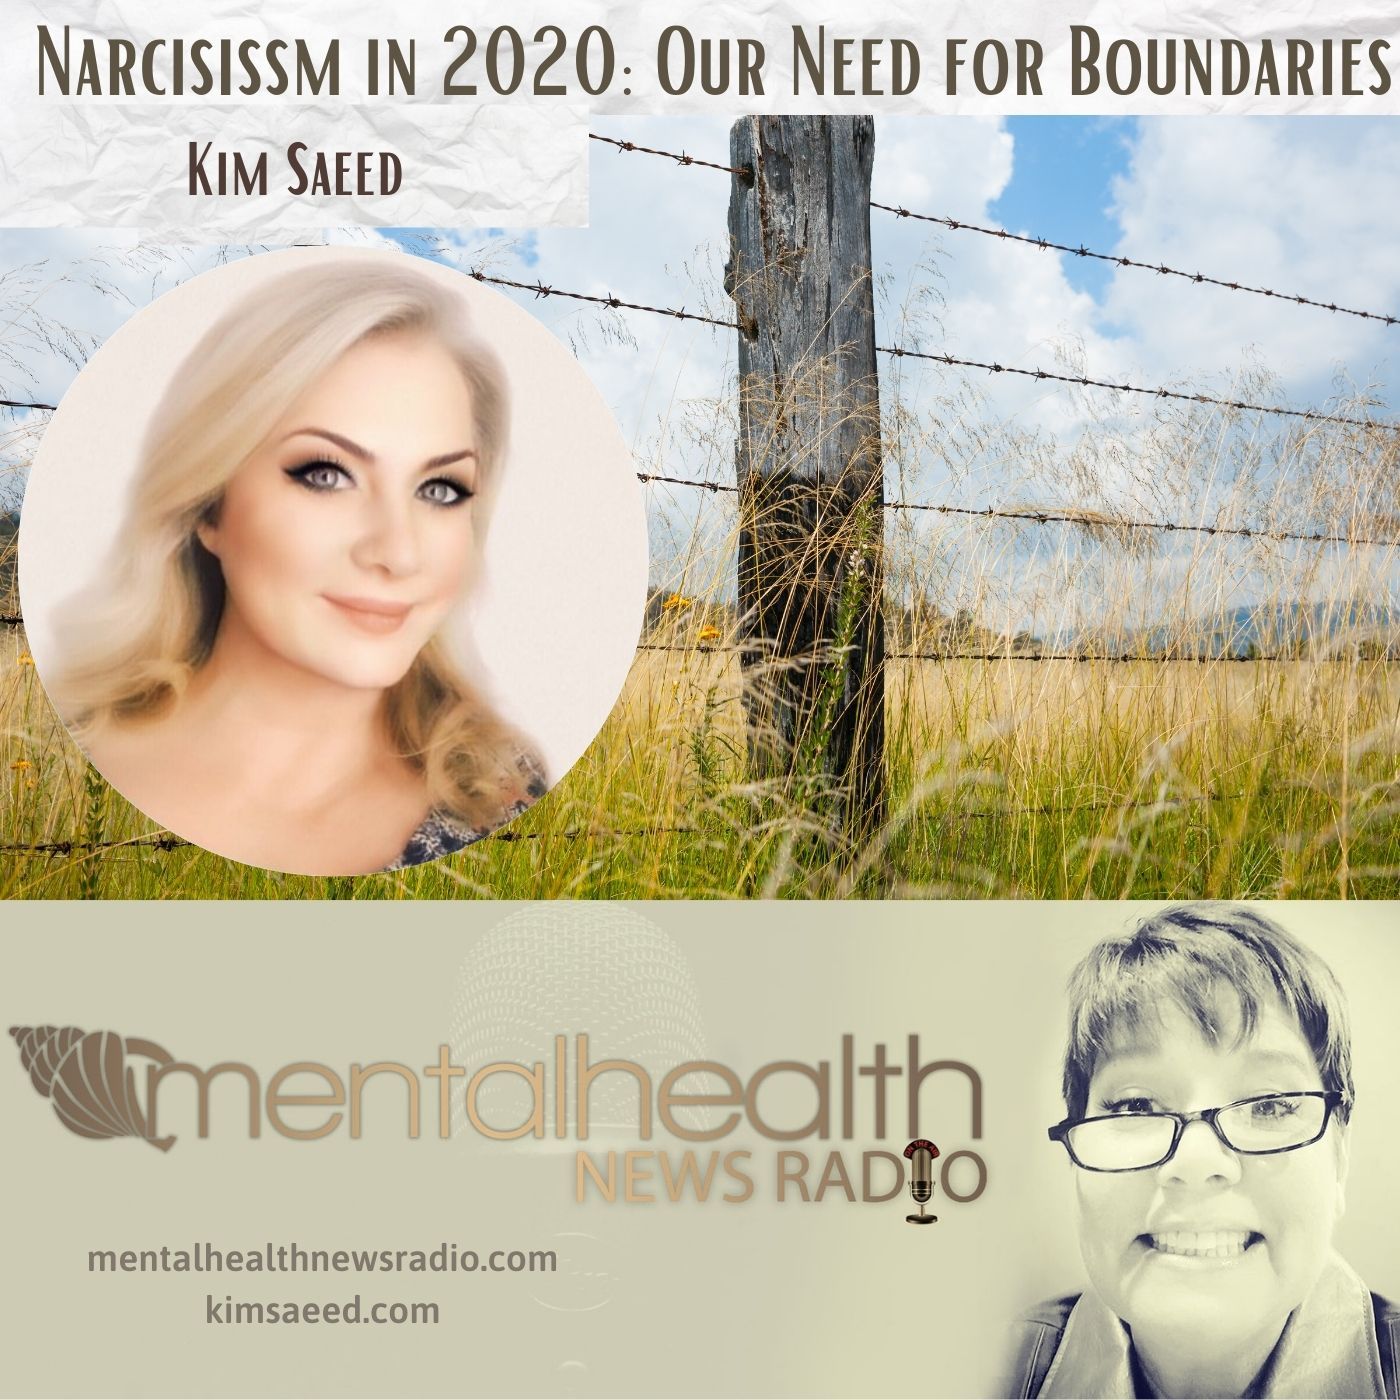 Mental Health News Radio - Narcisissm in 2020: Our Need for Boundaries with Kim Saeed